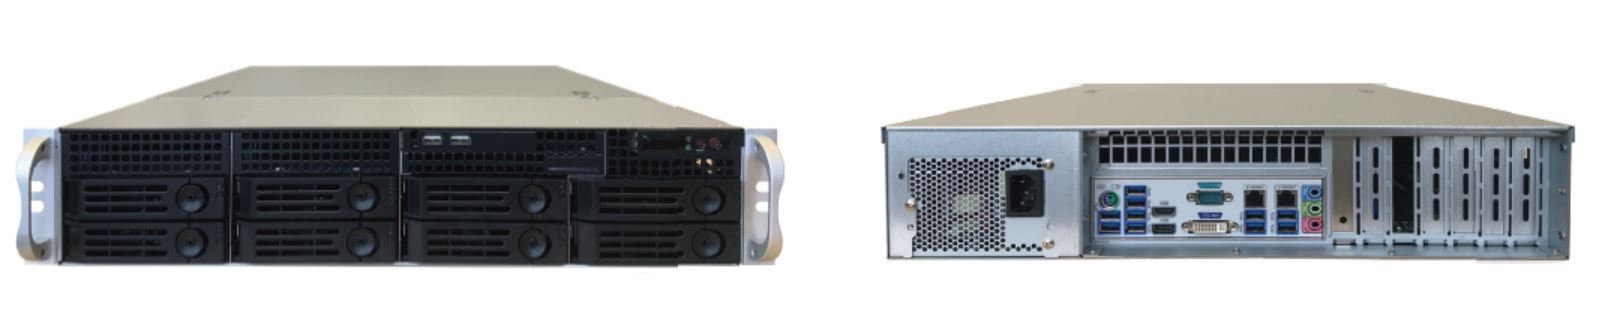 The IOR-4660-C20 with support for up to 128 IP video cameras is a good example of an advanced ioNetworks NVR.